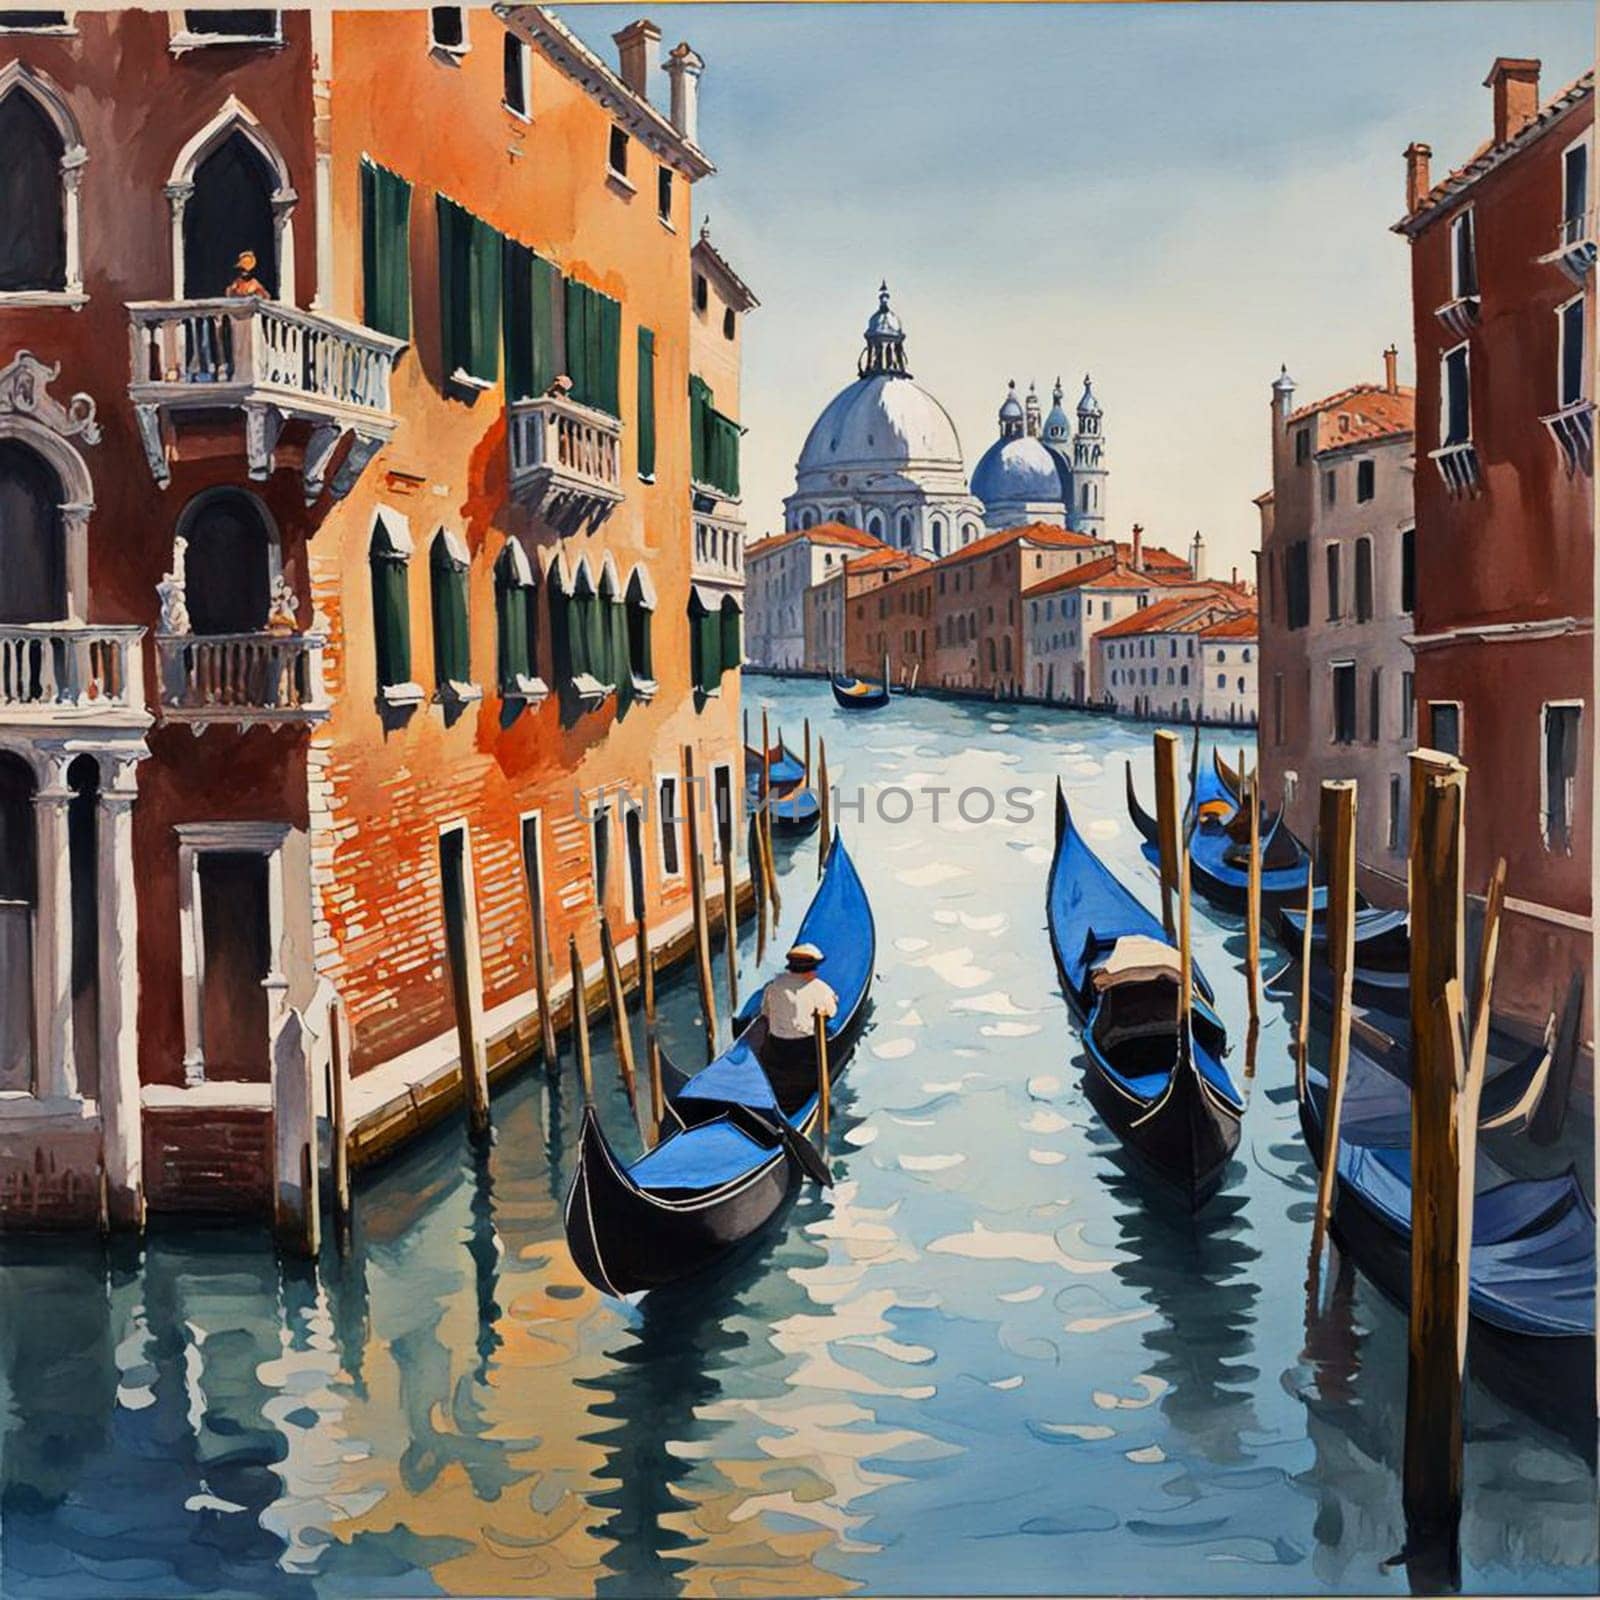 Oil painting of Venetian architecture and water canal in Venice by Vailatese46